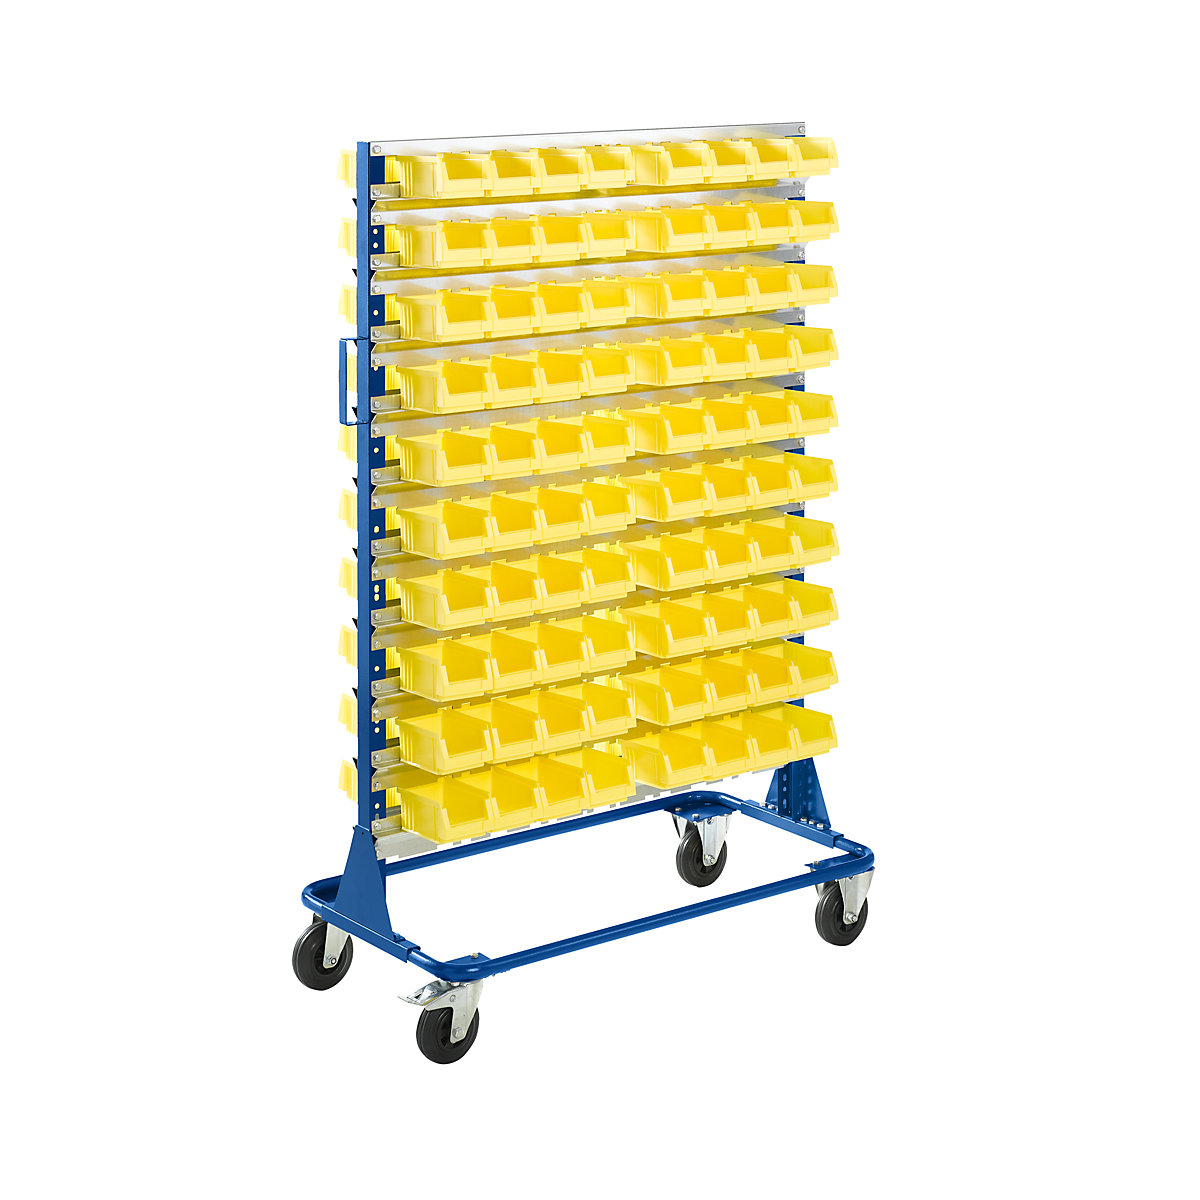 Mobile rack, height 1588 mm, mobile rack with 160 open fronted storage bins, gentian blue-3